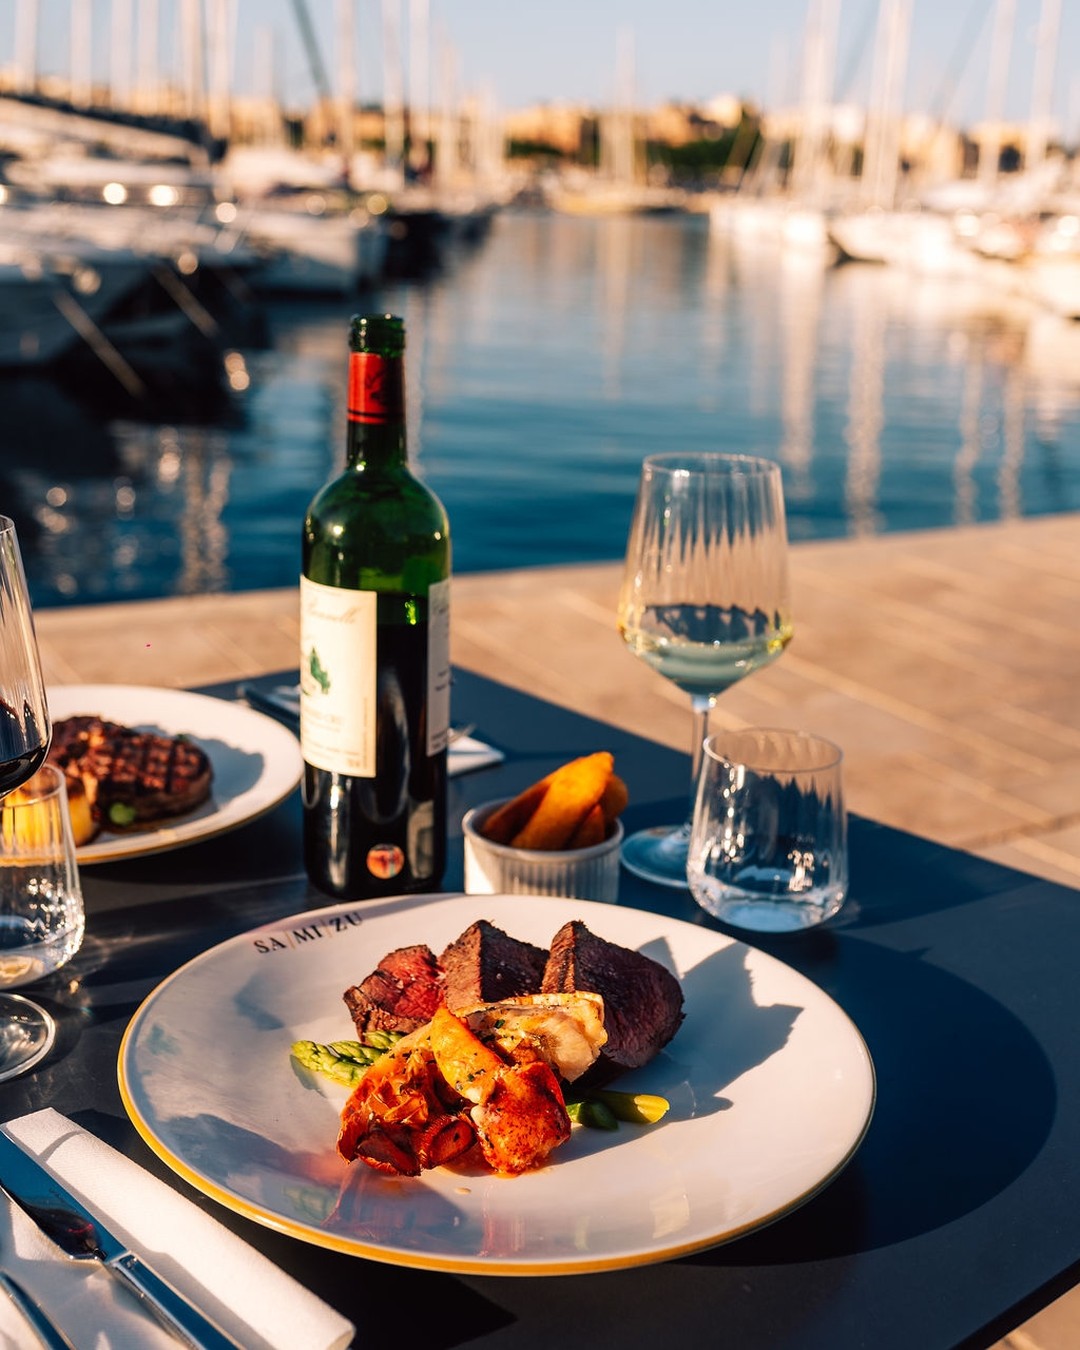 Fine wine, good food and the great views and atmosphere of Marina Di Valletta